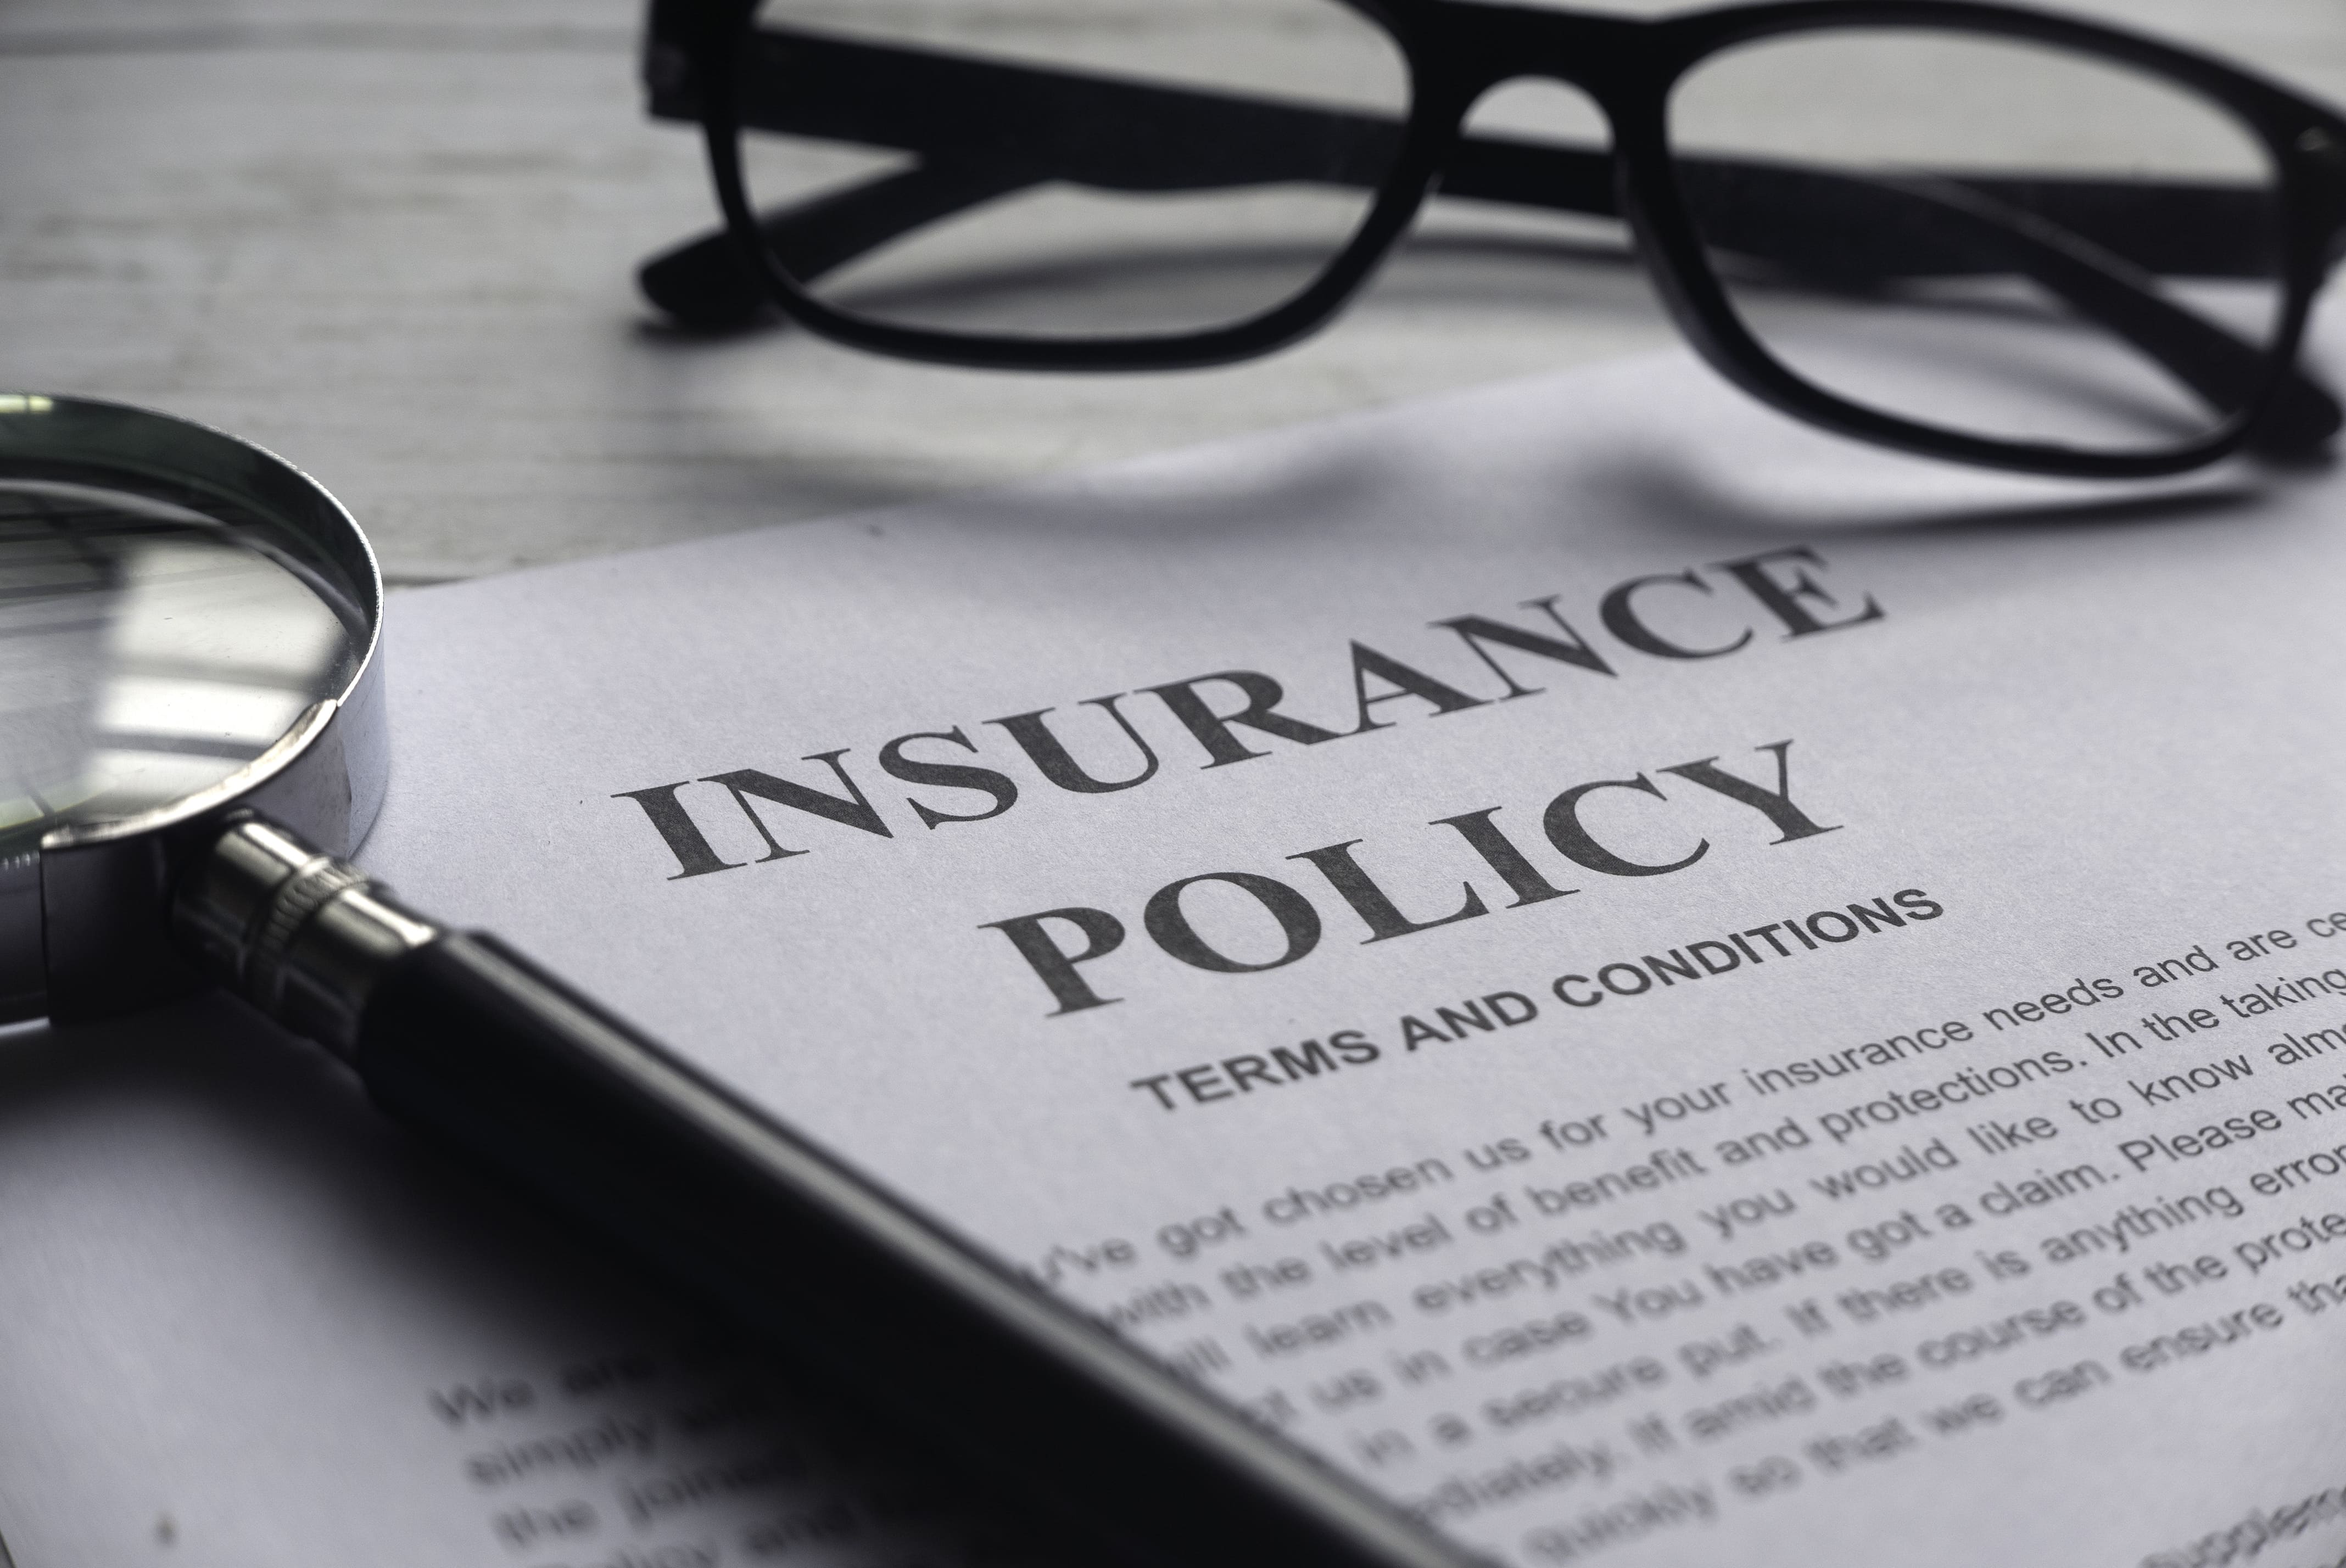 General Insurance Value Measures reporting rules for firms